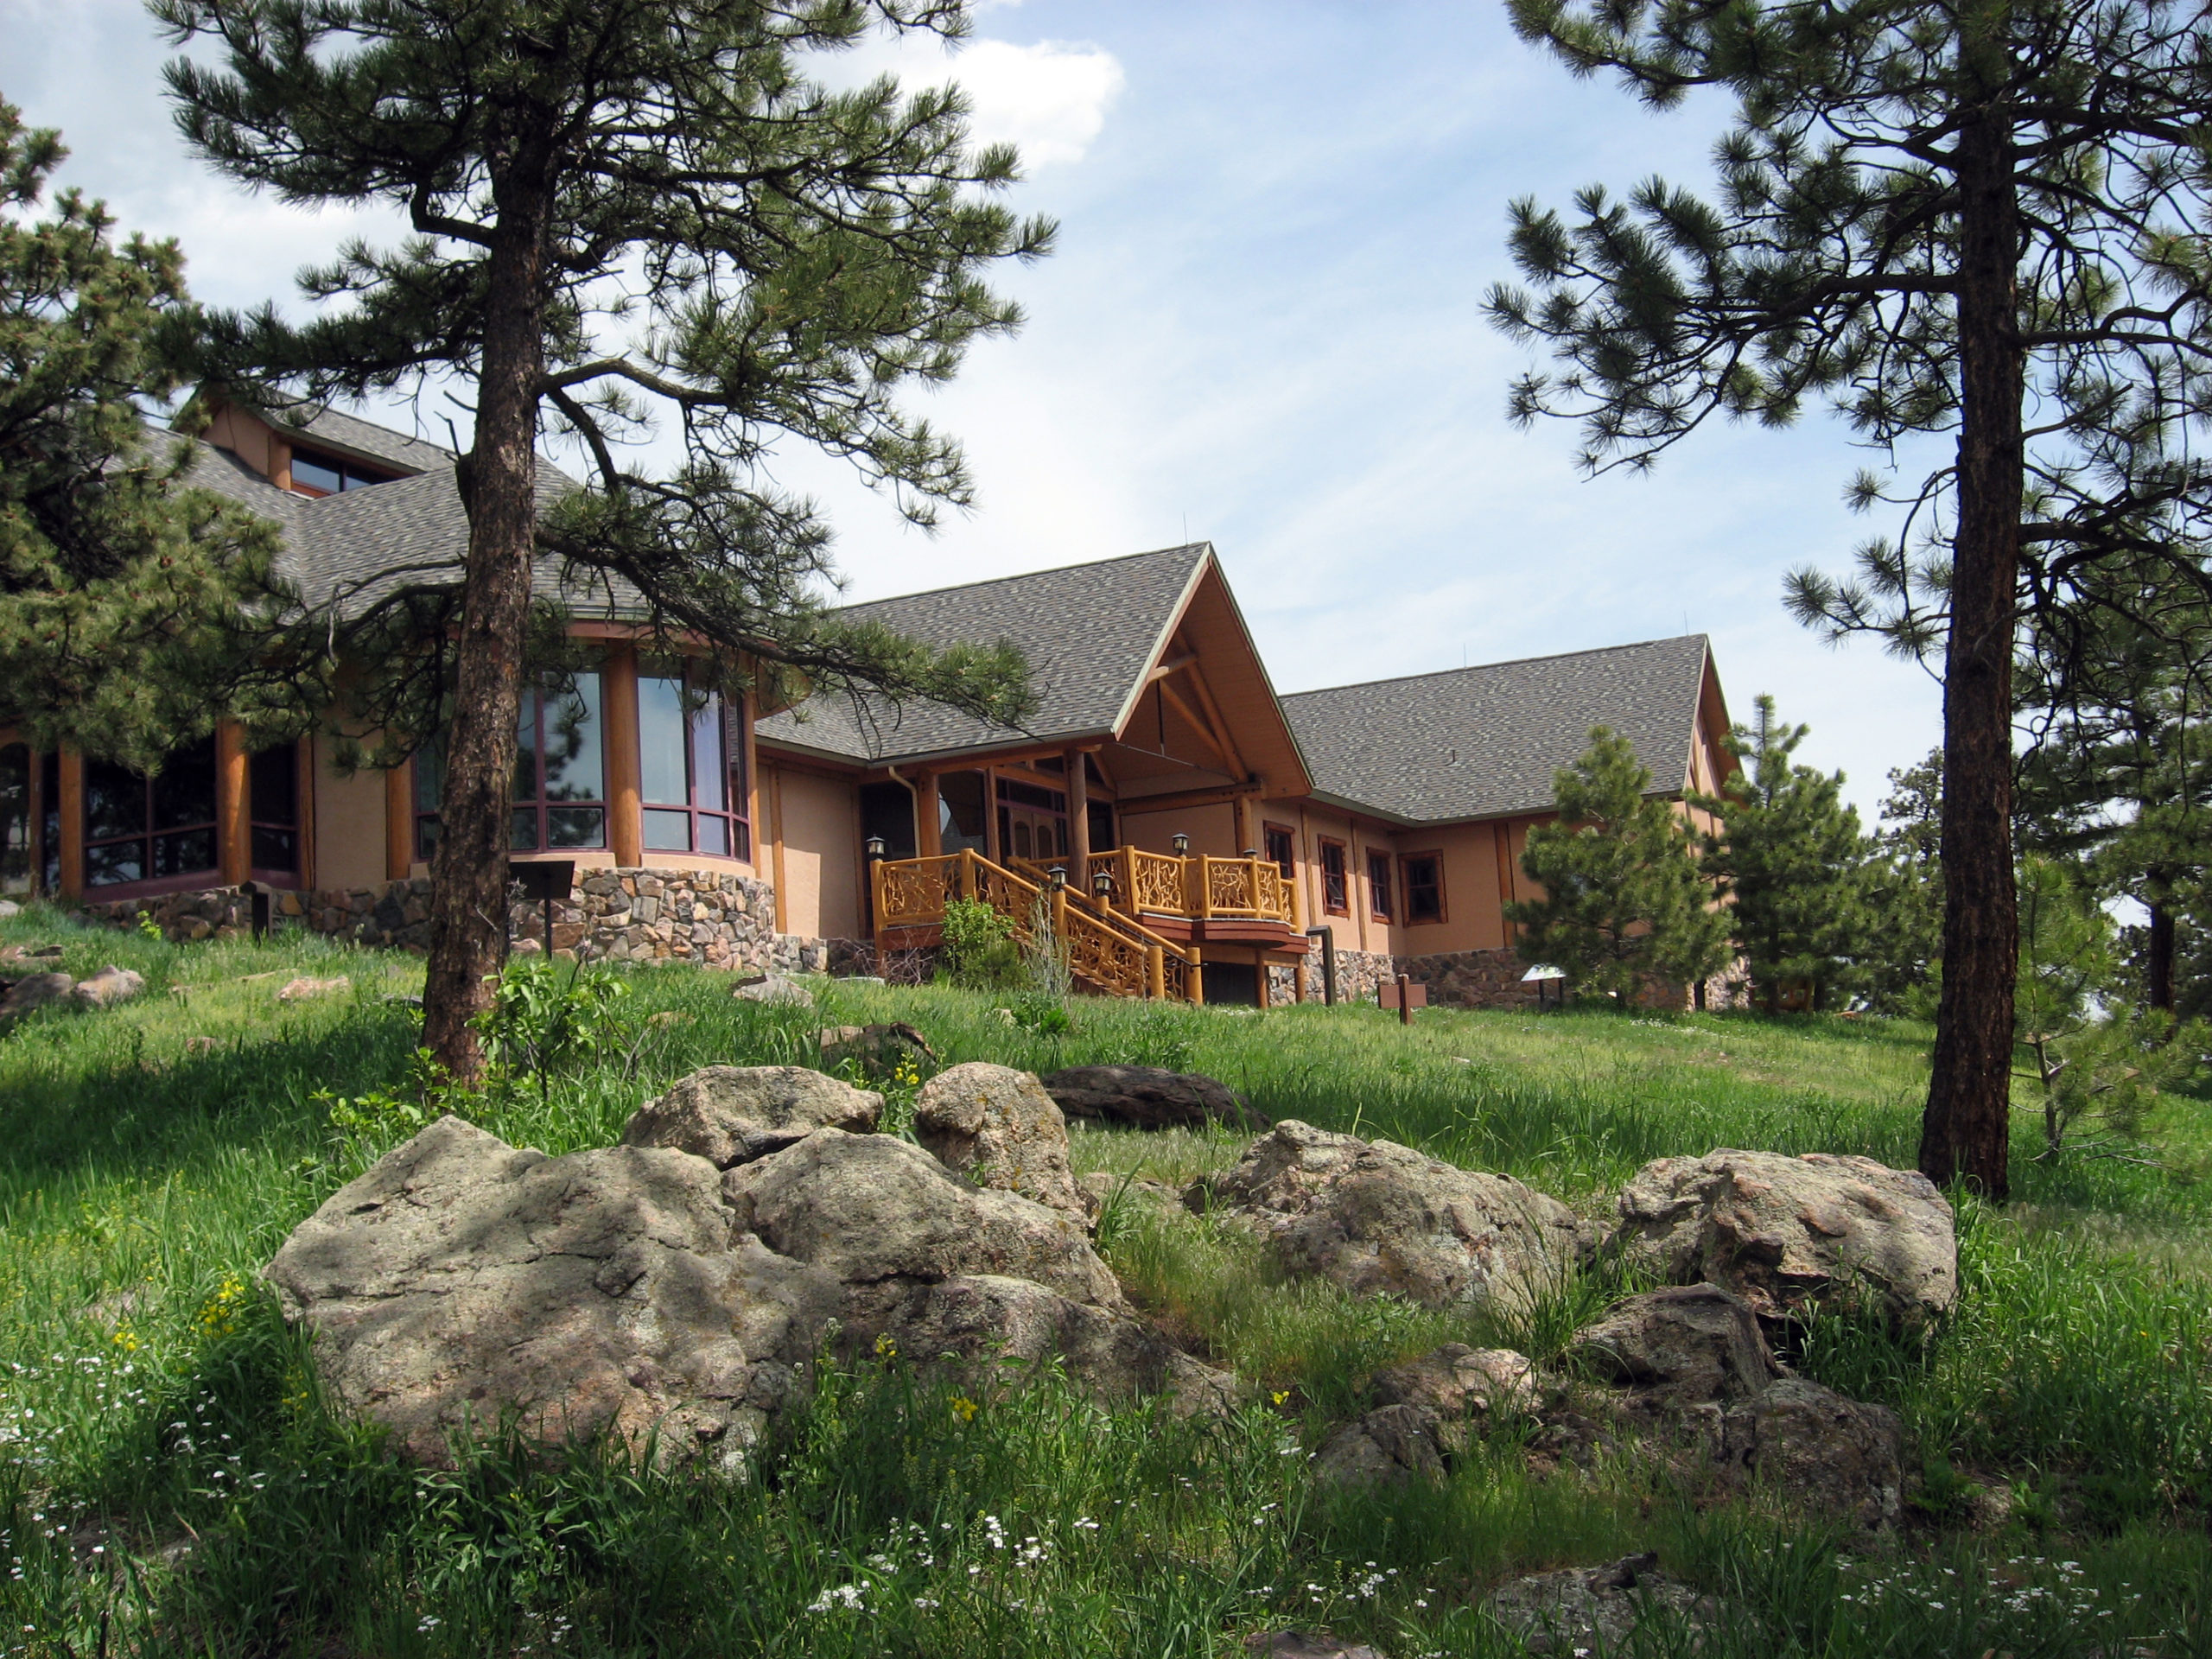 Mountain building with wood and stone accents on a sunny day with grass, large stones and evergreen trees.